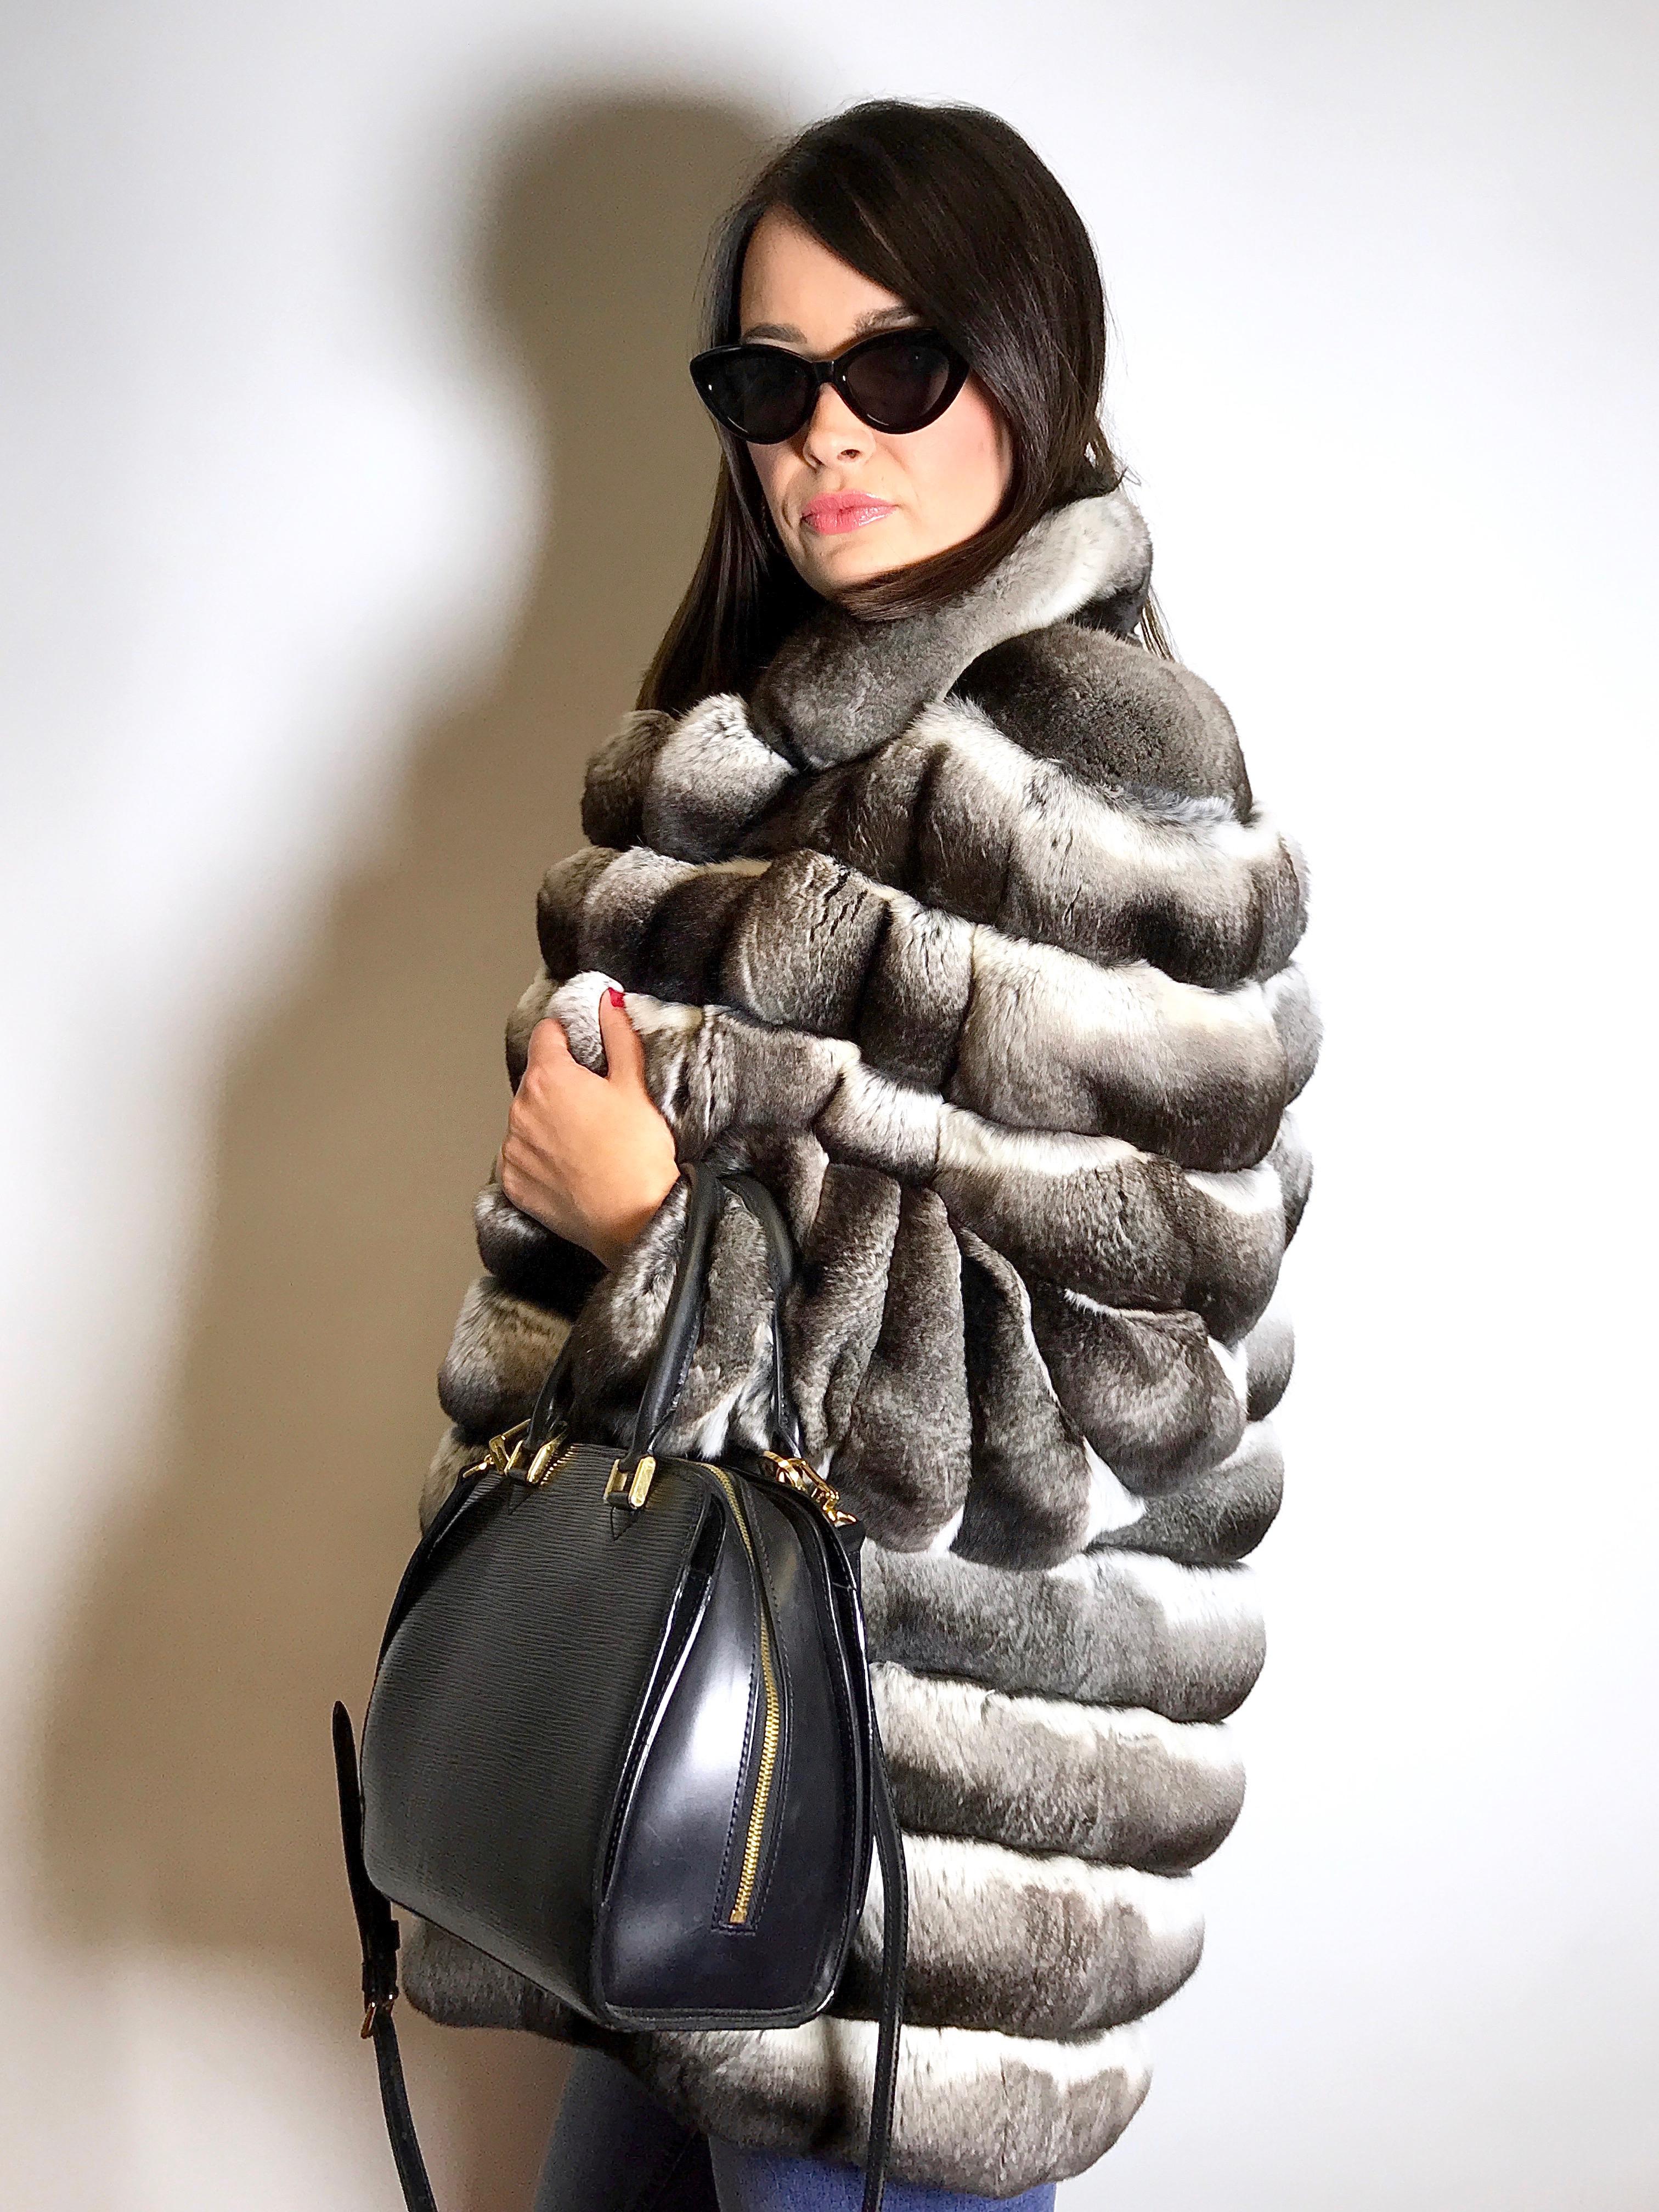 High quality chinchilla fur jacket
Exclusively made by SLUPINSKI. 
First-class furrier making, made of whole furs. A dreamlike unique piece.

Size EU: 38 / S-M
Total length: 78 cm
Shoulder width: 47 cm
Sleeve length: 61 cm

The jacket is in